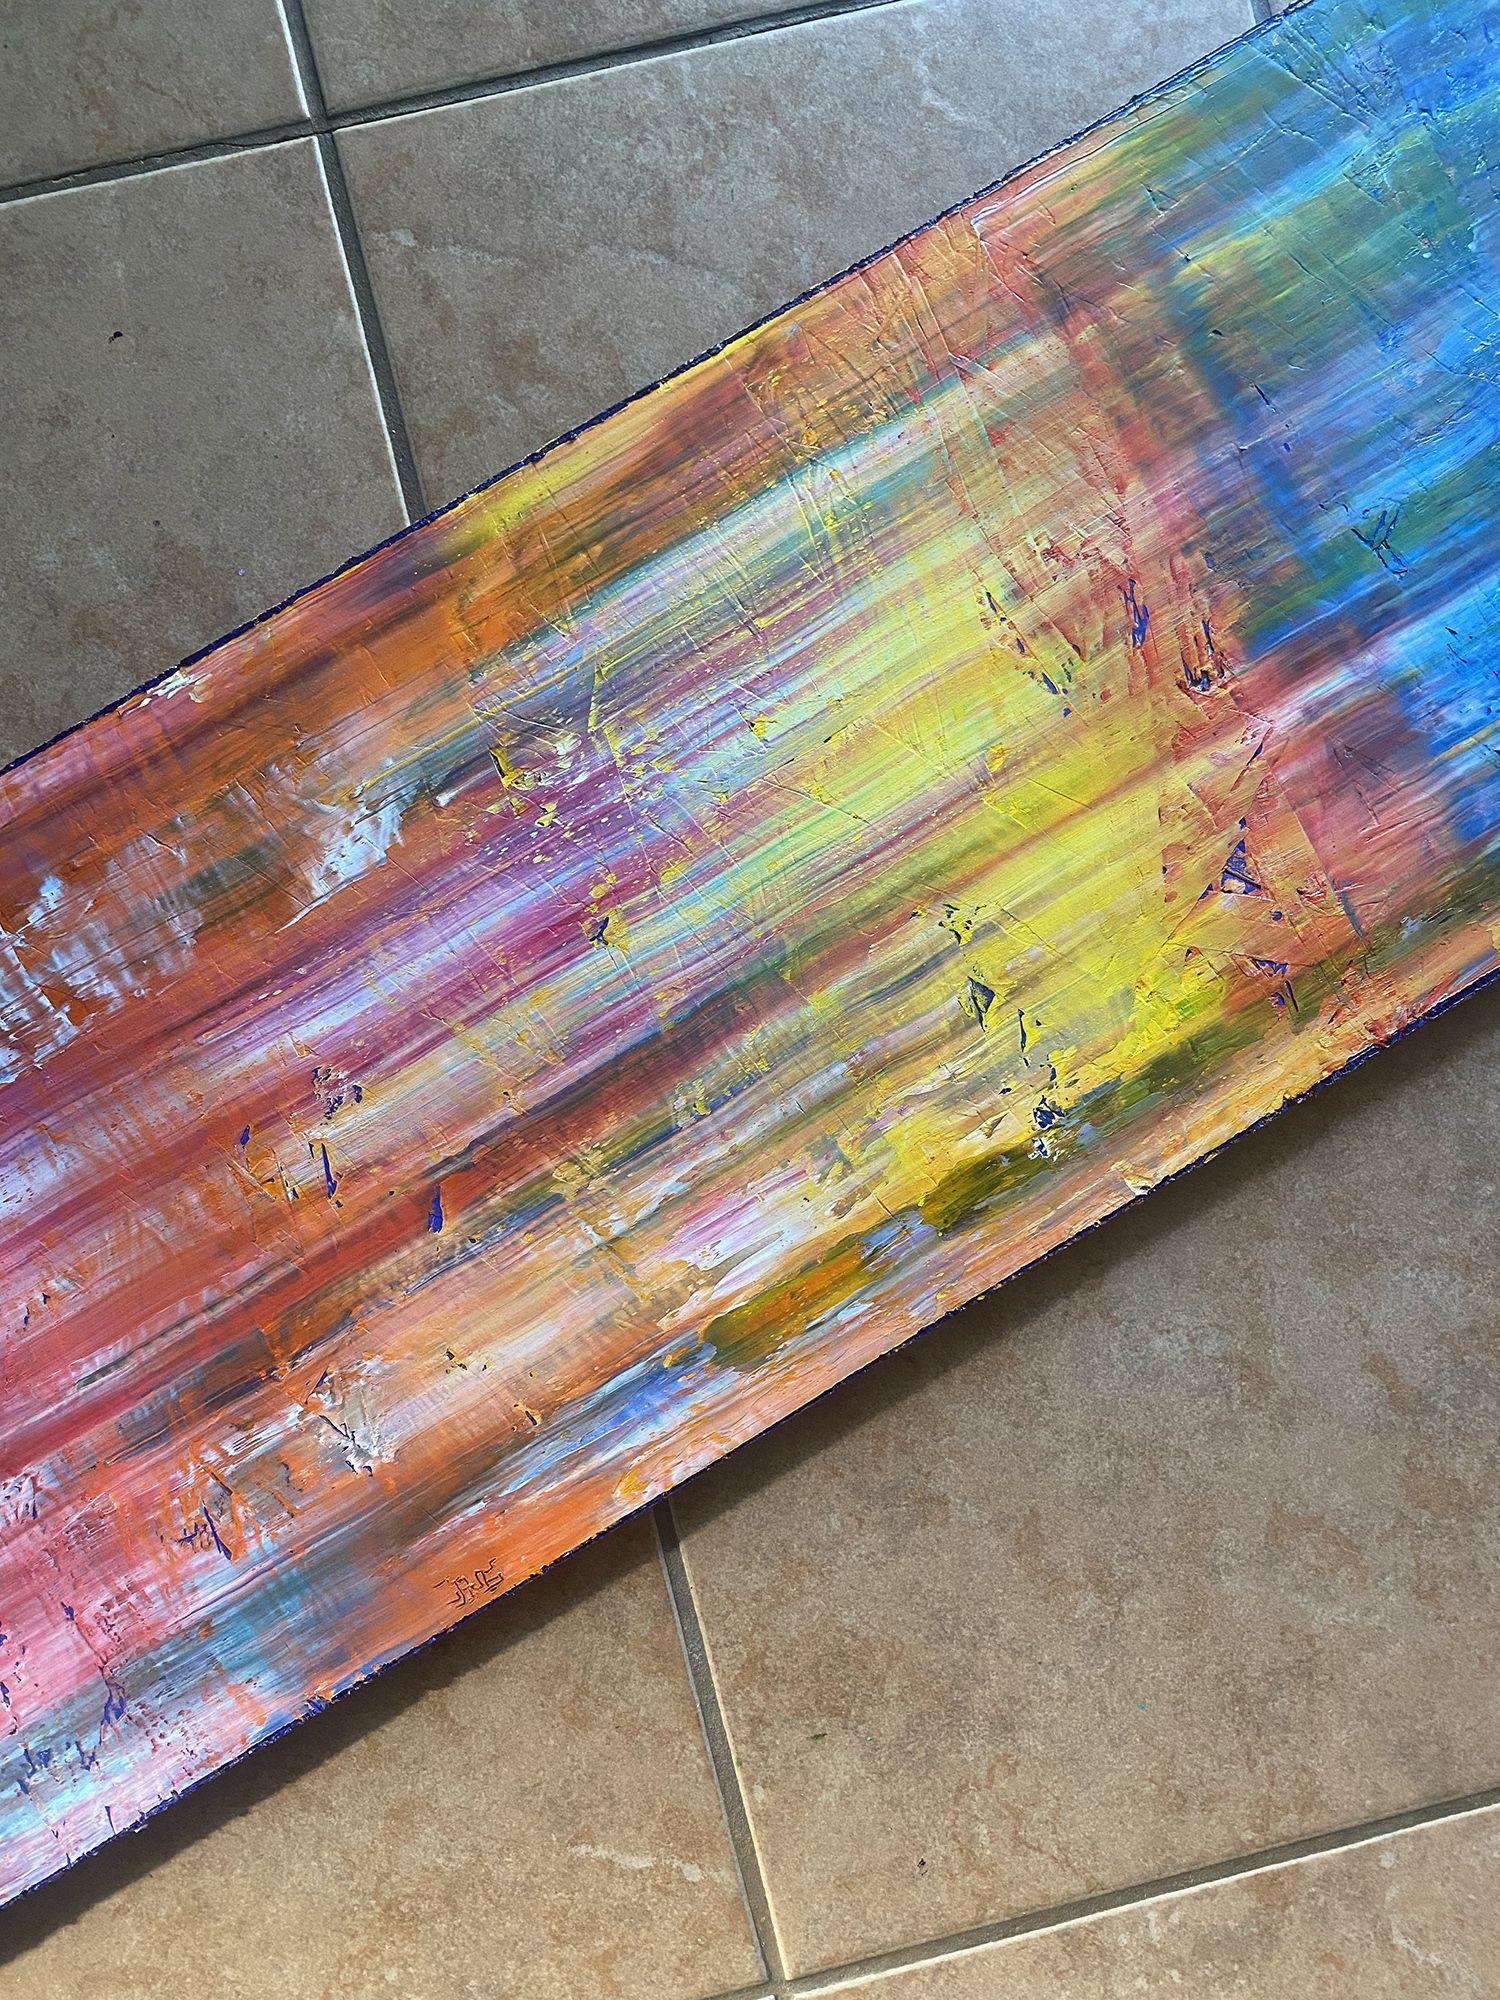 This is a completely unique and original abstract oil painting on wood. This painting is part of a series of exciting works that epitomize certain techniques and an aesthetic I have been working to perfect over the years. The streaking colors are